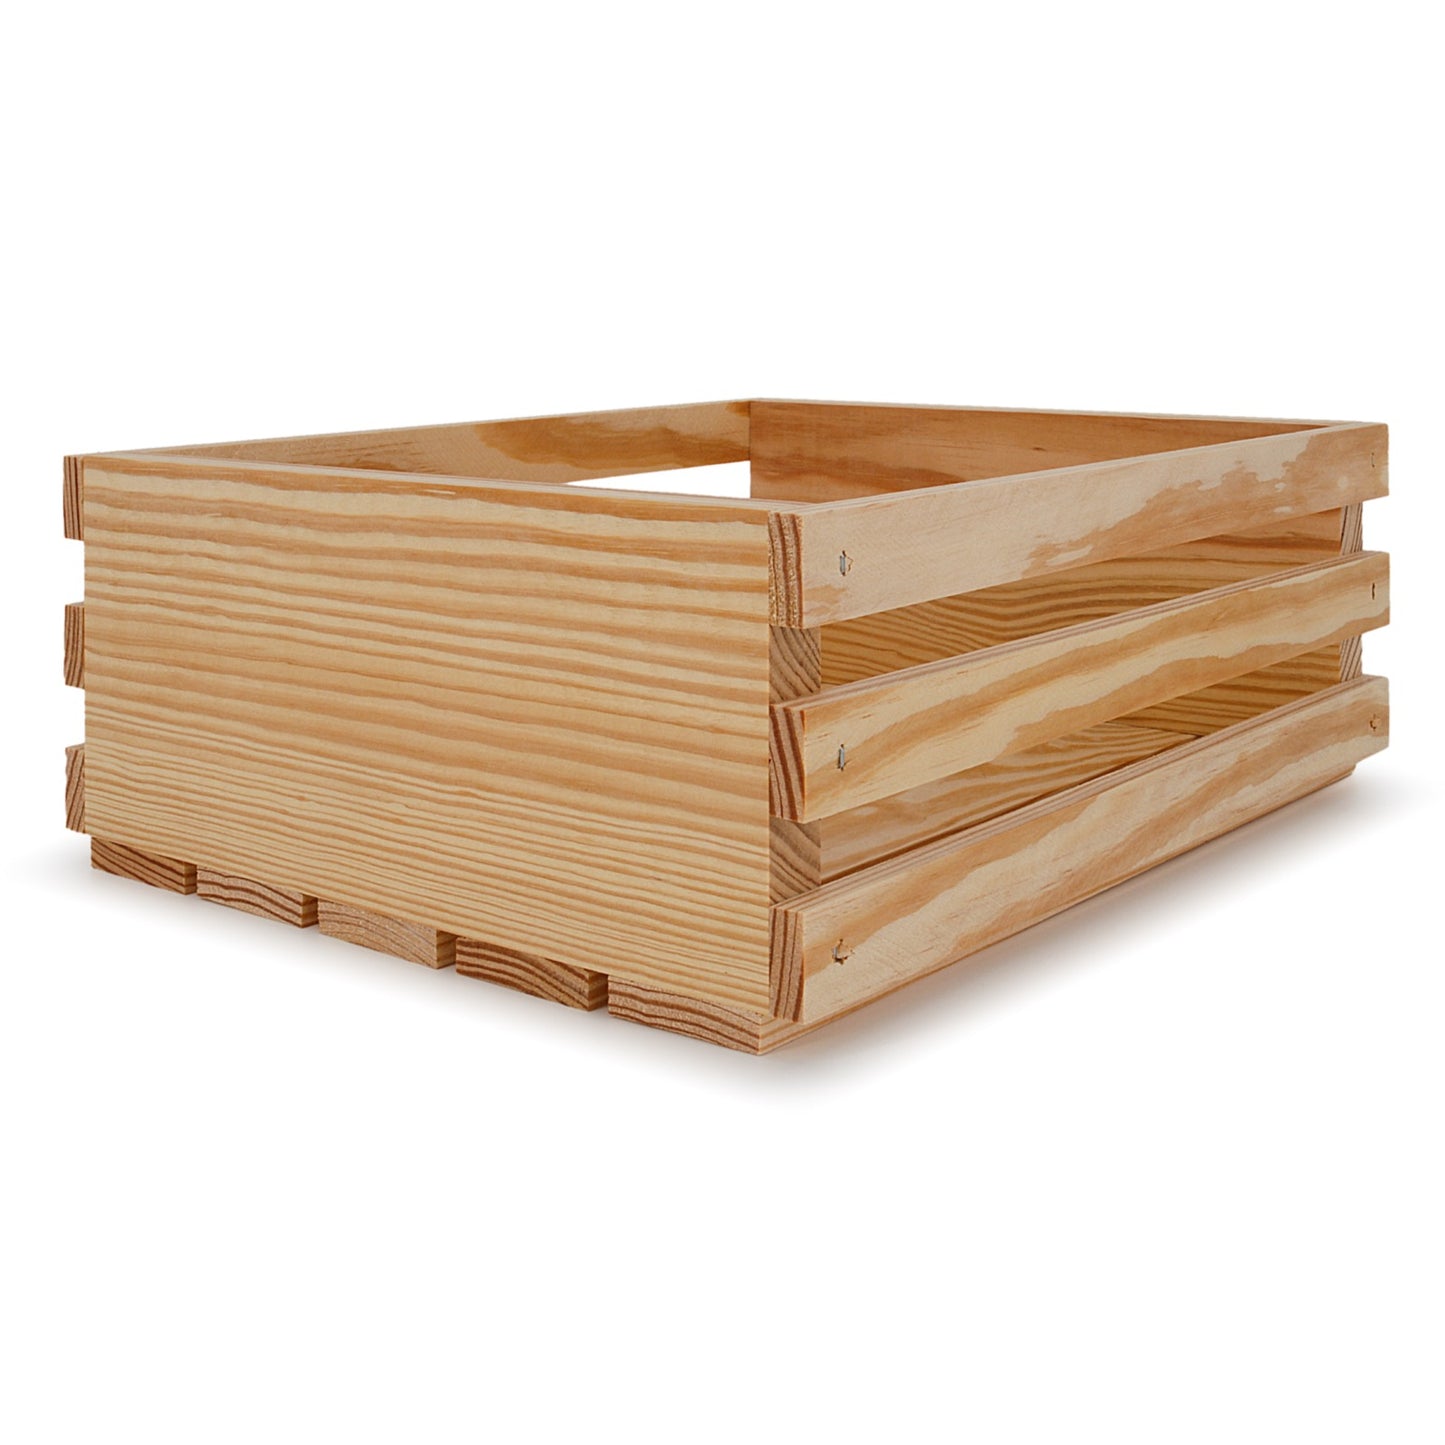 Small wooden crates 12x10x4.5, 6-SS-12-10-4.5-NX-NW-NL, 12-SS-12-10-4.5-NX-NW-NL, 24-SS-12-10-4.5-NX-NW-NL, 48-SS-12-10-4.5-NX-NW-NL, 96-SS-12-10-4.5-NX-NW-NL